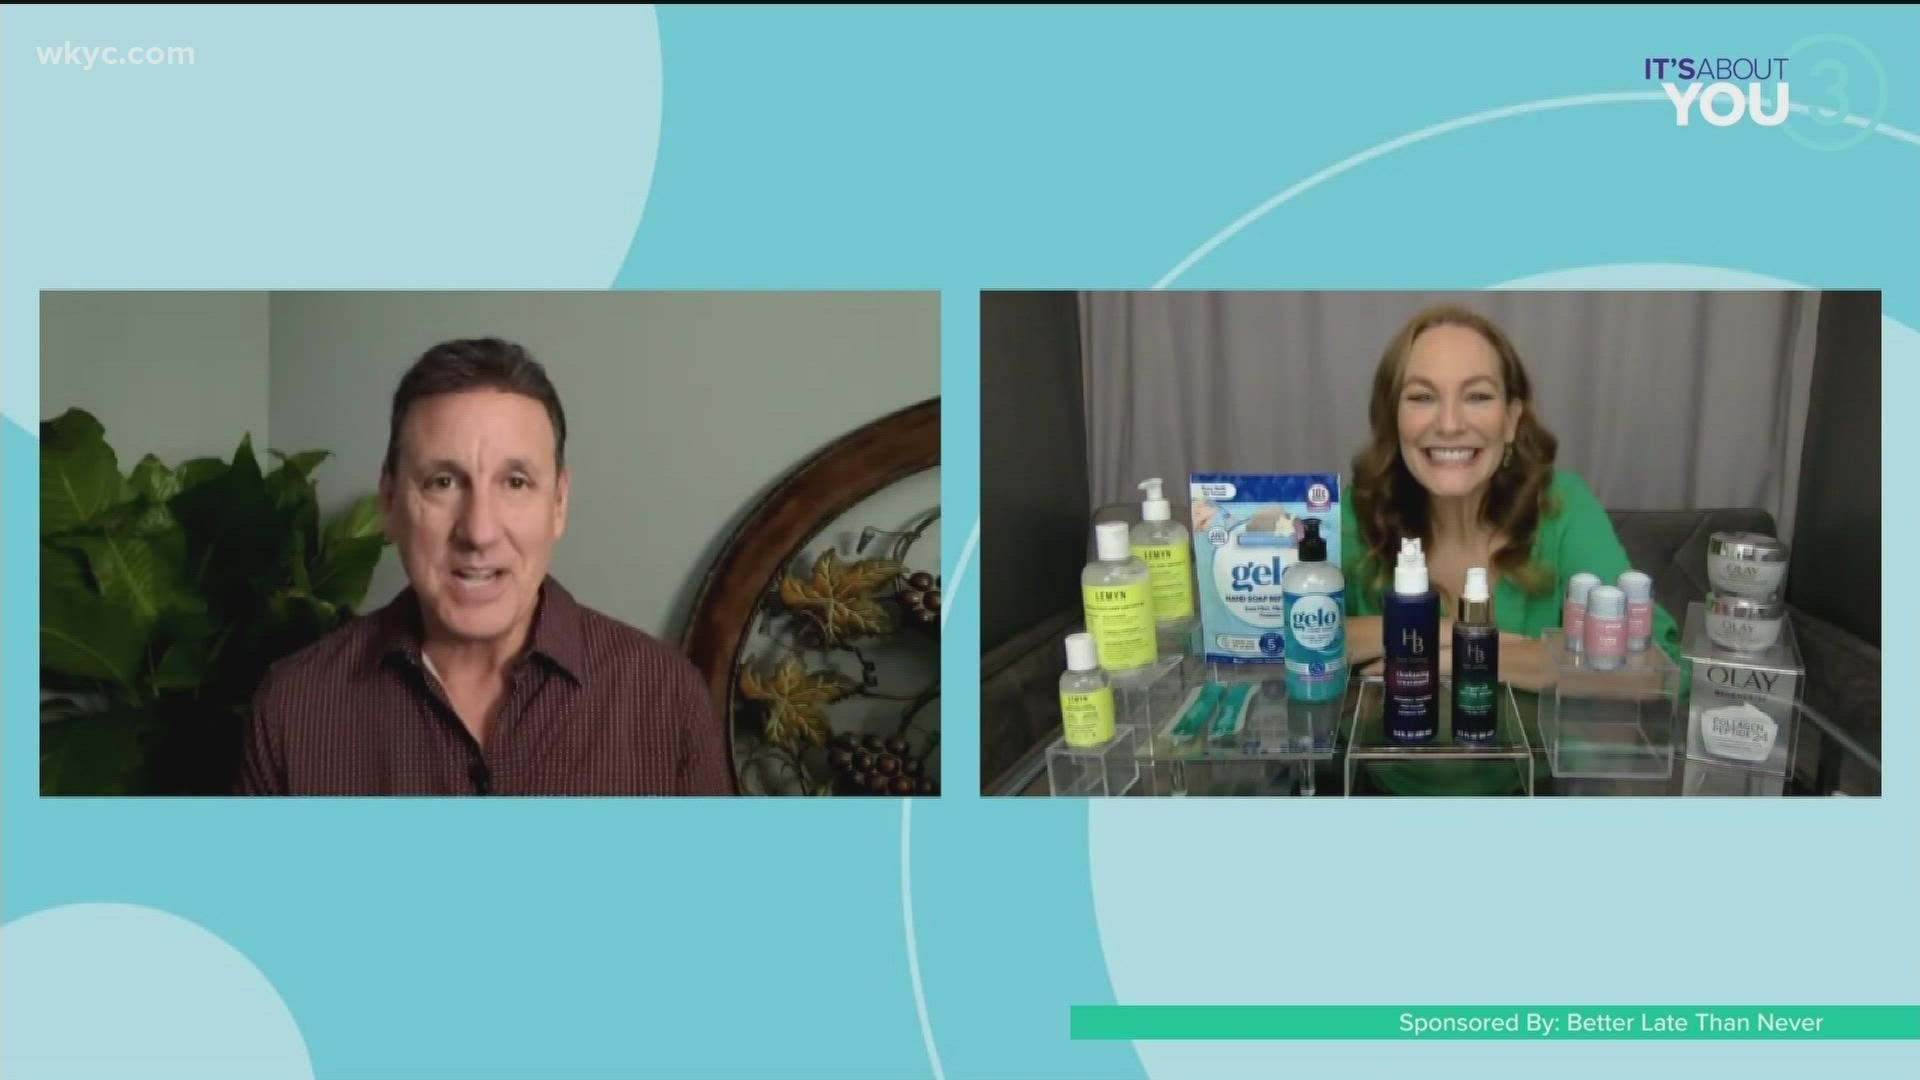 It's Self-Care Awareness Month! Joe talks with Cheryl Kramer Kaye about fall beauty tips and treating yourself to some "me time".